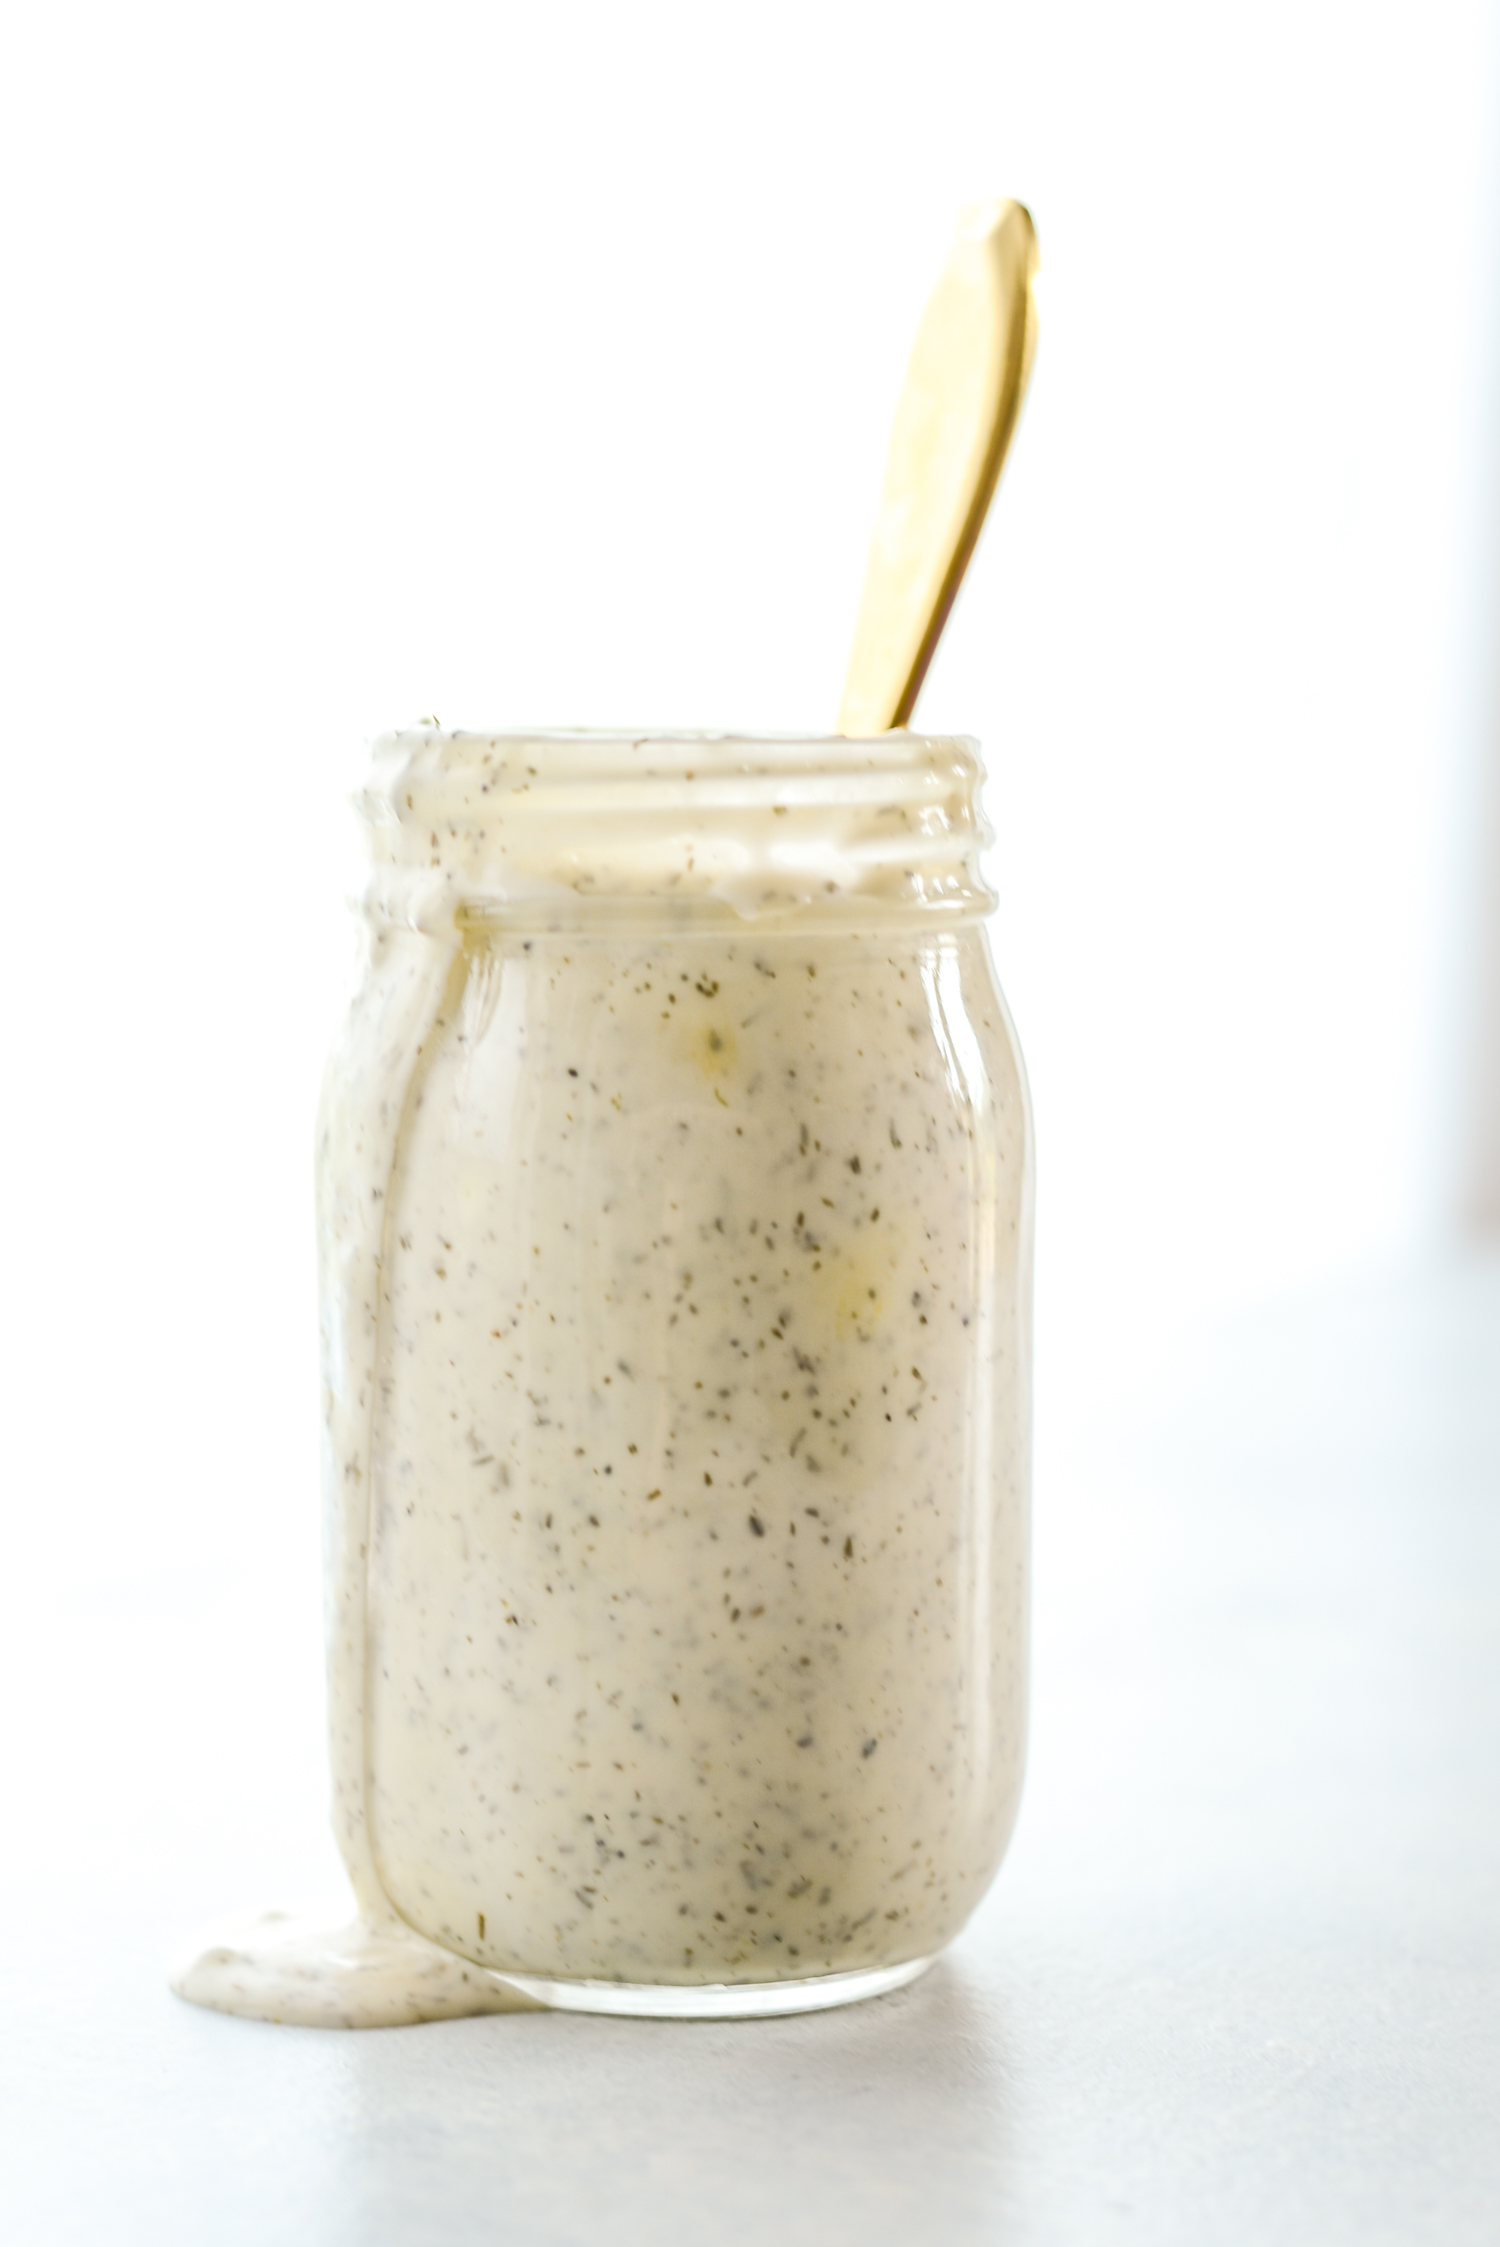 2-Minute Healthy Dairy-Free Ranch Dressing | simplerootswellness.com #ranchdressing #dairyfree #whole30 #paleo #healthy #easy